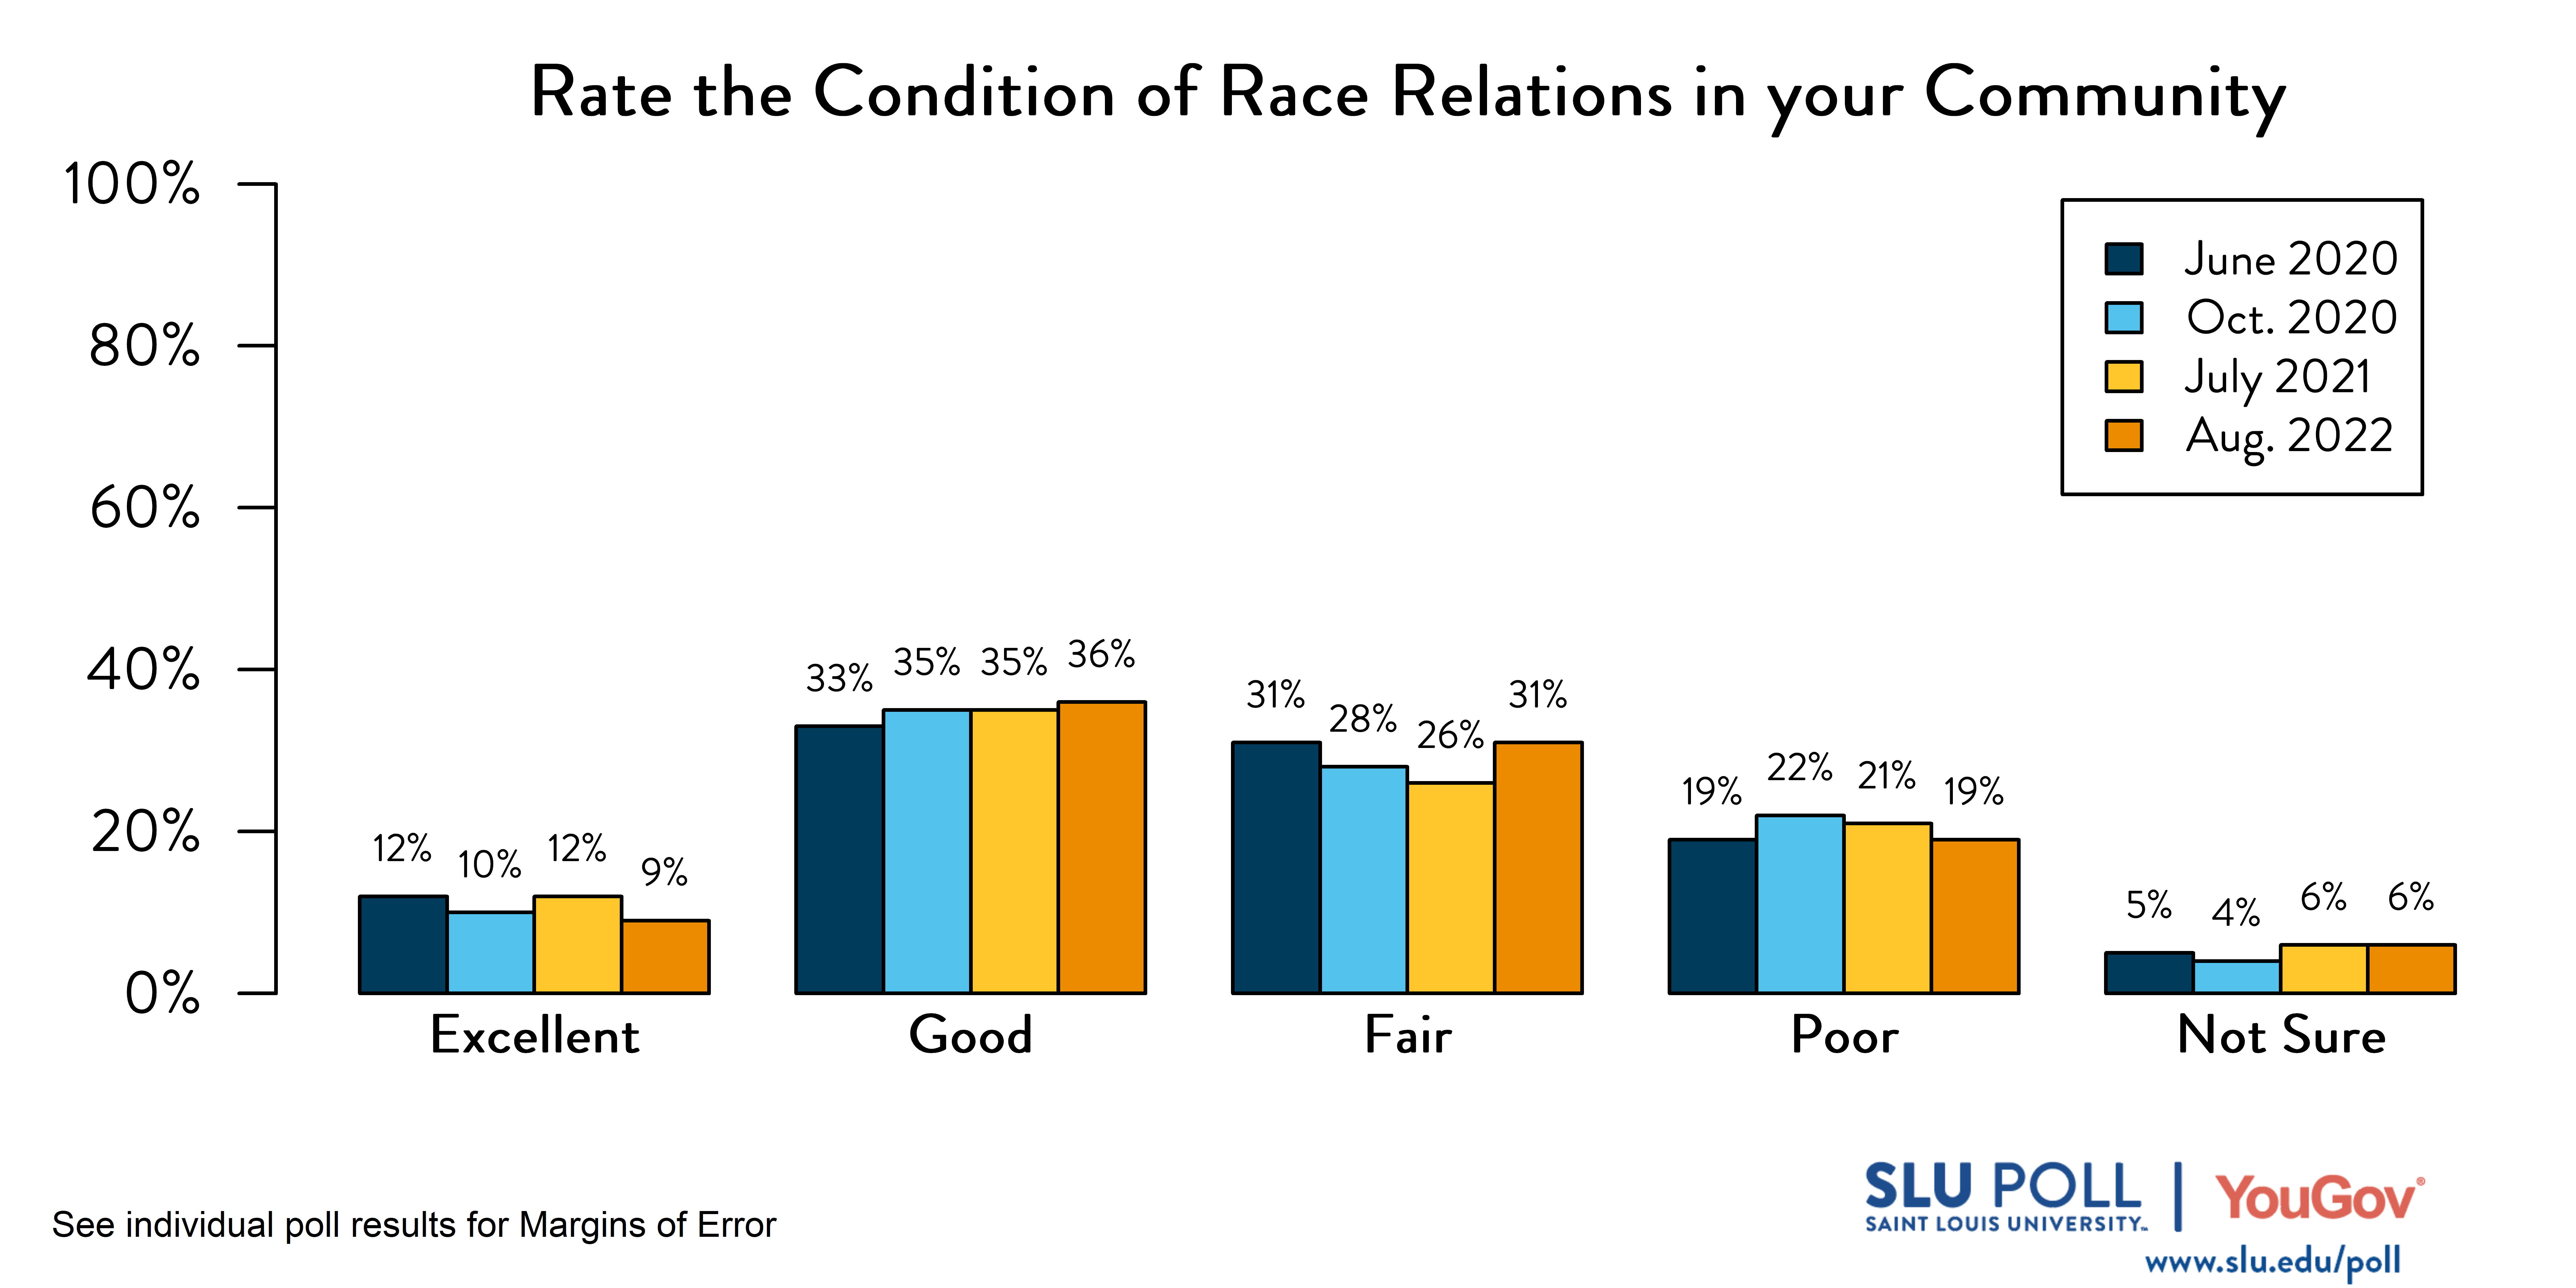 Likely voters' responses to 'How would you rate the following: Race relations in your community?'. June 2020 Voter Responses 12% Excellent, 33% Good, 31% Fair, 19% Poor, and 5% Not Sure. October 2020 Voter Responses: 10% Excellent, 35% Good, 28% Fair, 22% Poor, and 4% Not sure. July 2021 Voter Responses: 12% Excellent, 35% Good, 26% Fair, 21% Poor, and 6% Not sure. August 2021 Voter Responses: 9% Excellent, 36% Good, 31% Fair, 19% Poor, and 6% Not sure.